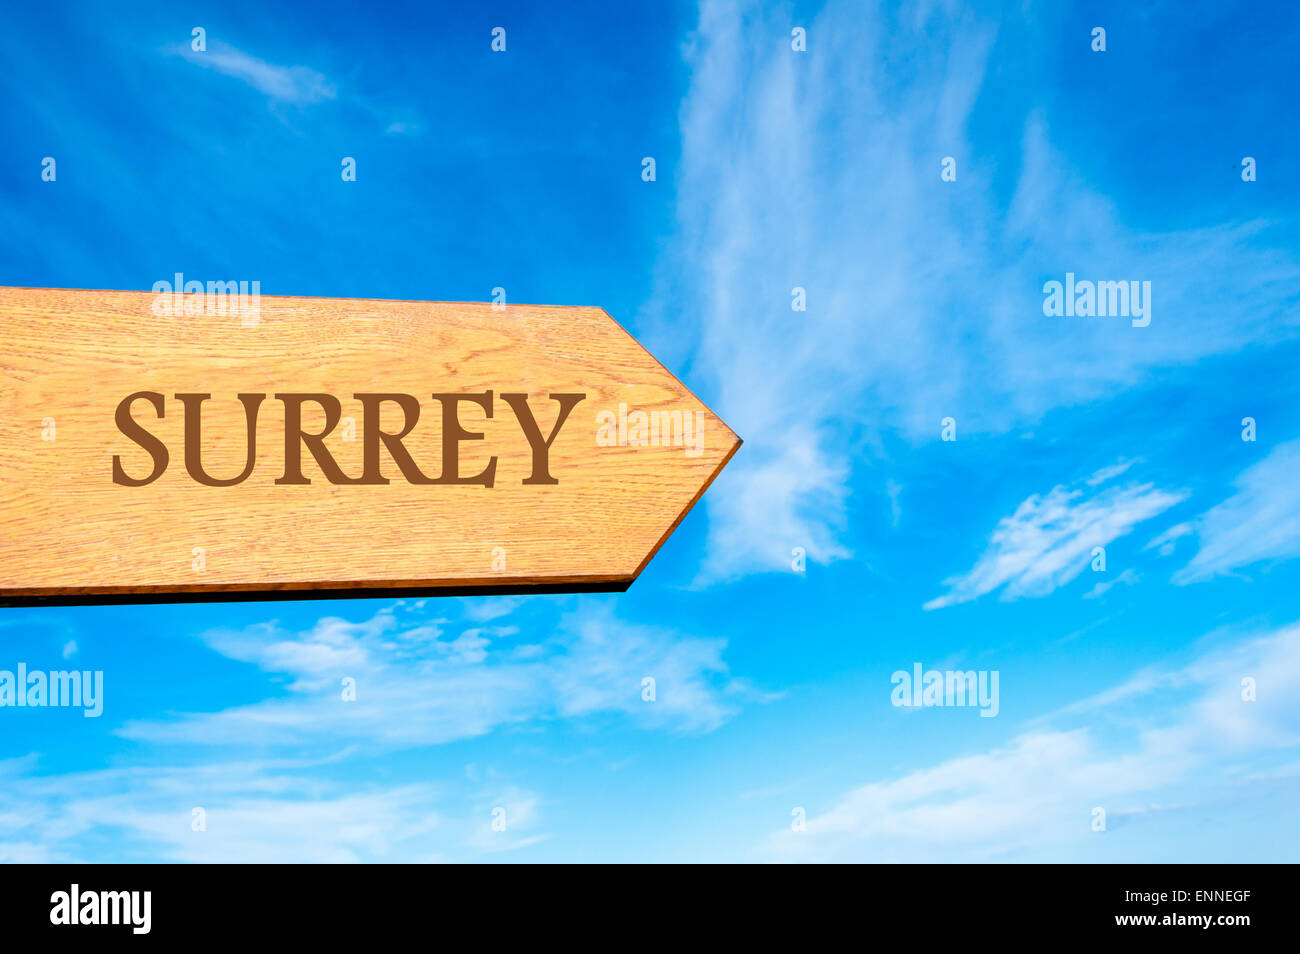 Wooden arrow sign pointing destination SURREY, ENGLAND against clear blue sky with copy space available. Travel destination conceptual image Stock Photo